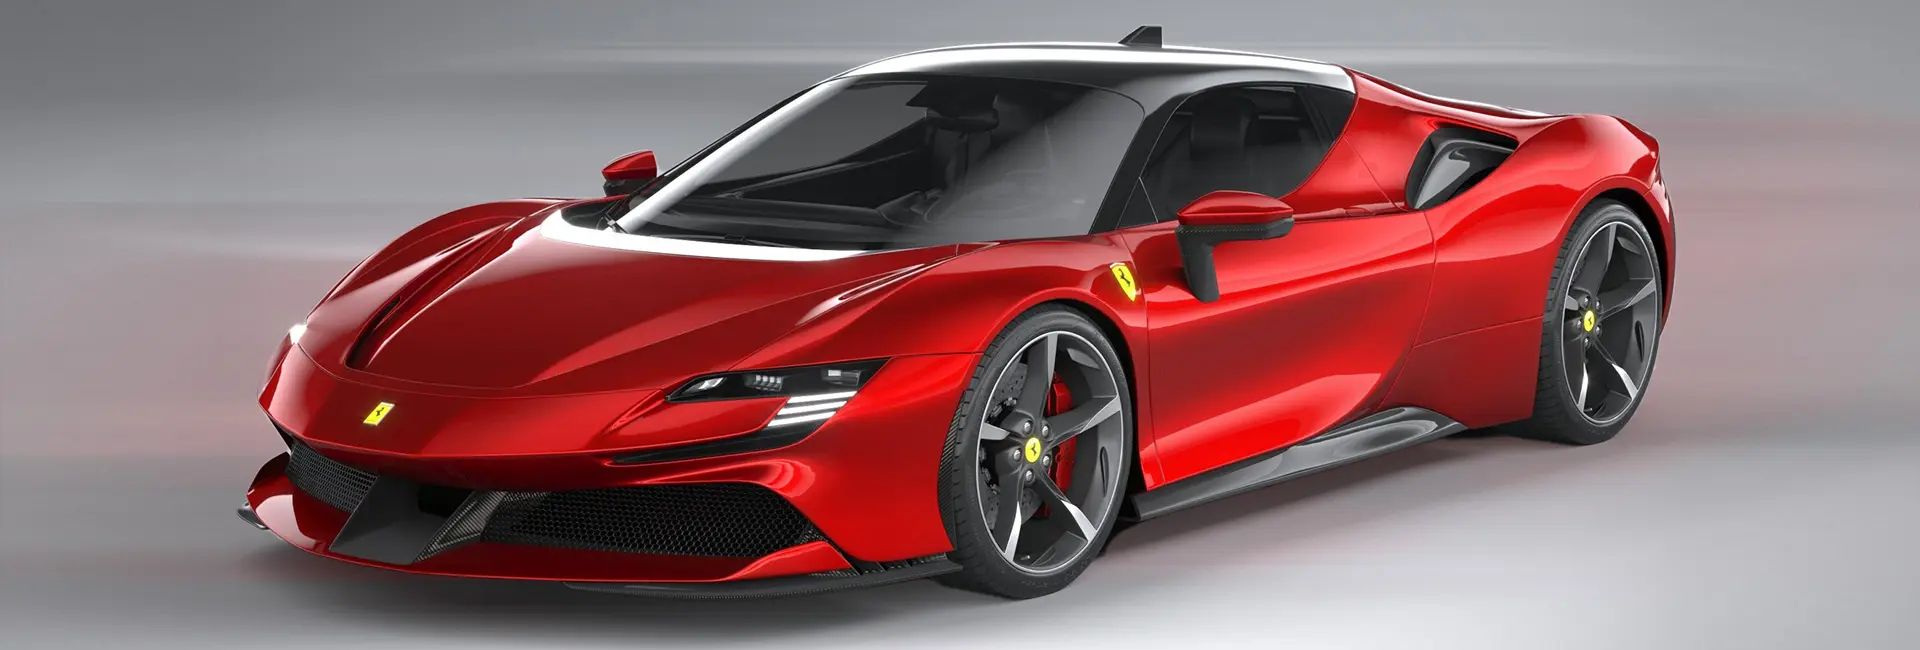 ferrari car hire sipson london - How much does it cost to rent a Rolls Royce for a day in London